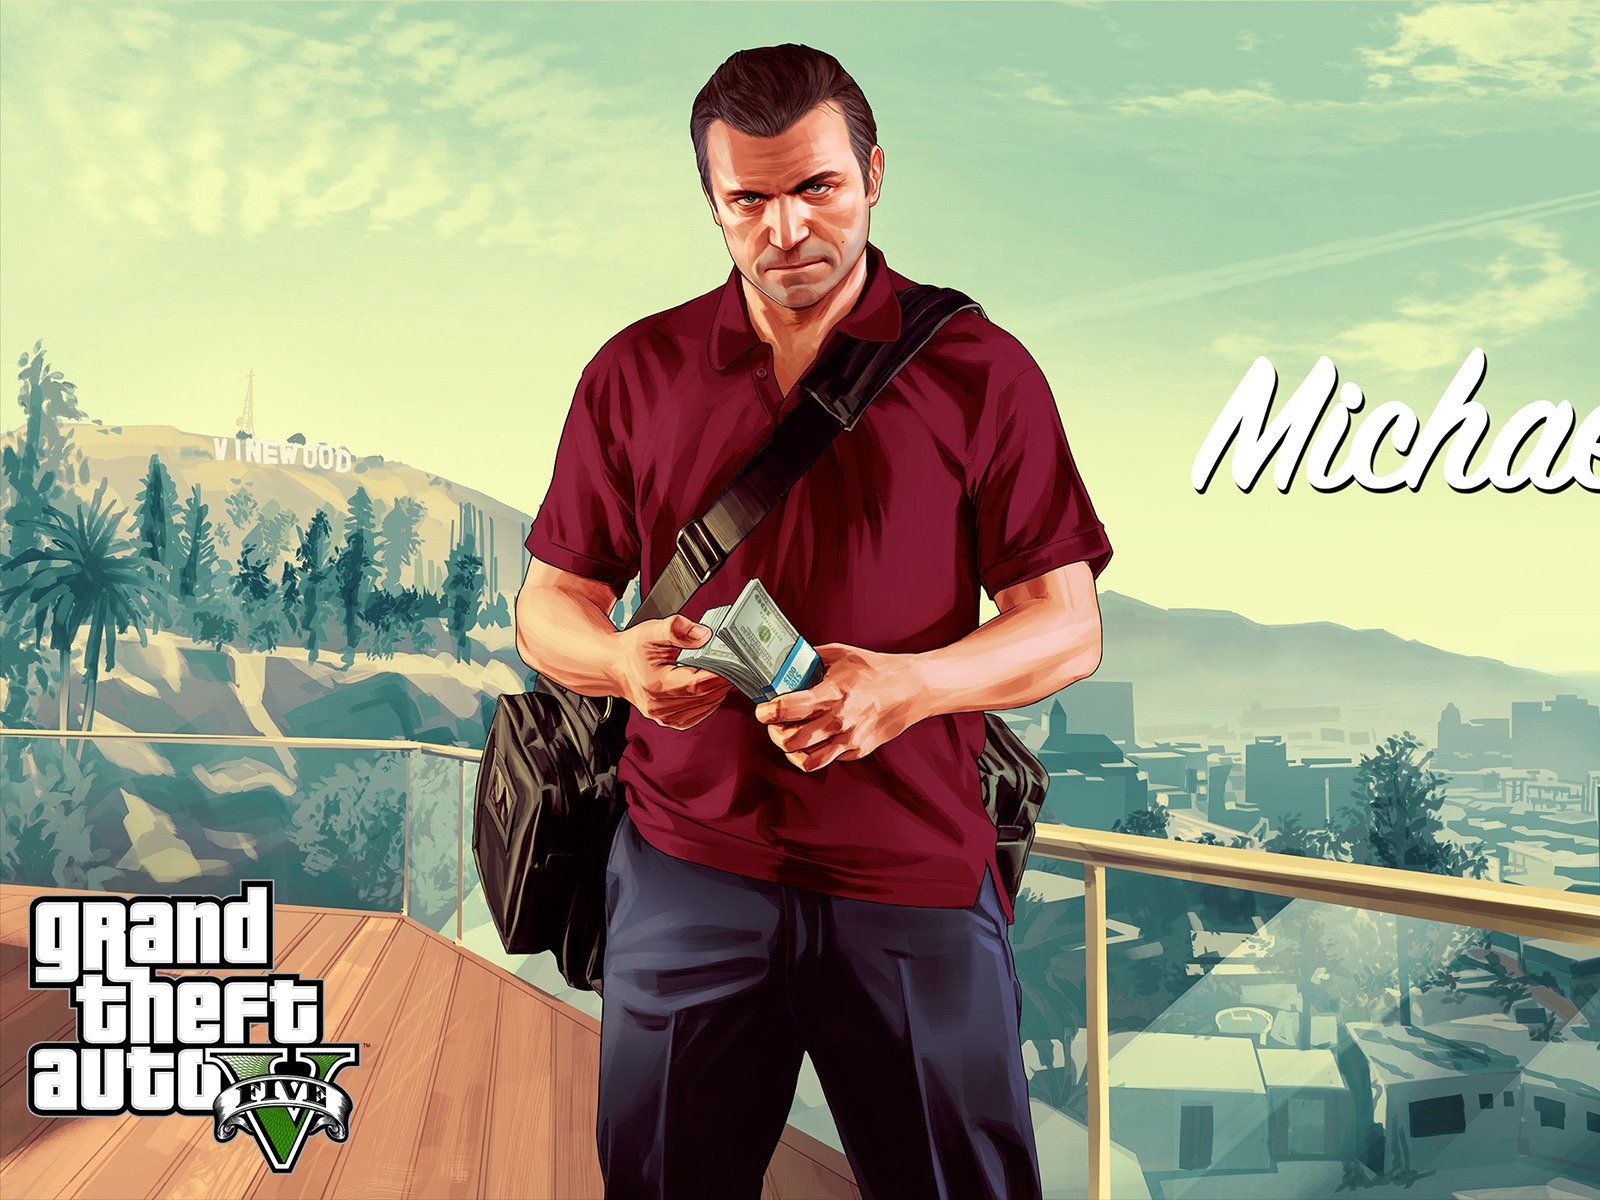 Michael with Money GTA V for 1600 x 1200 resolution